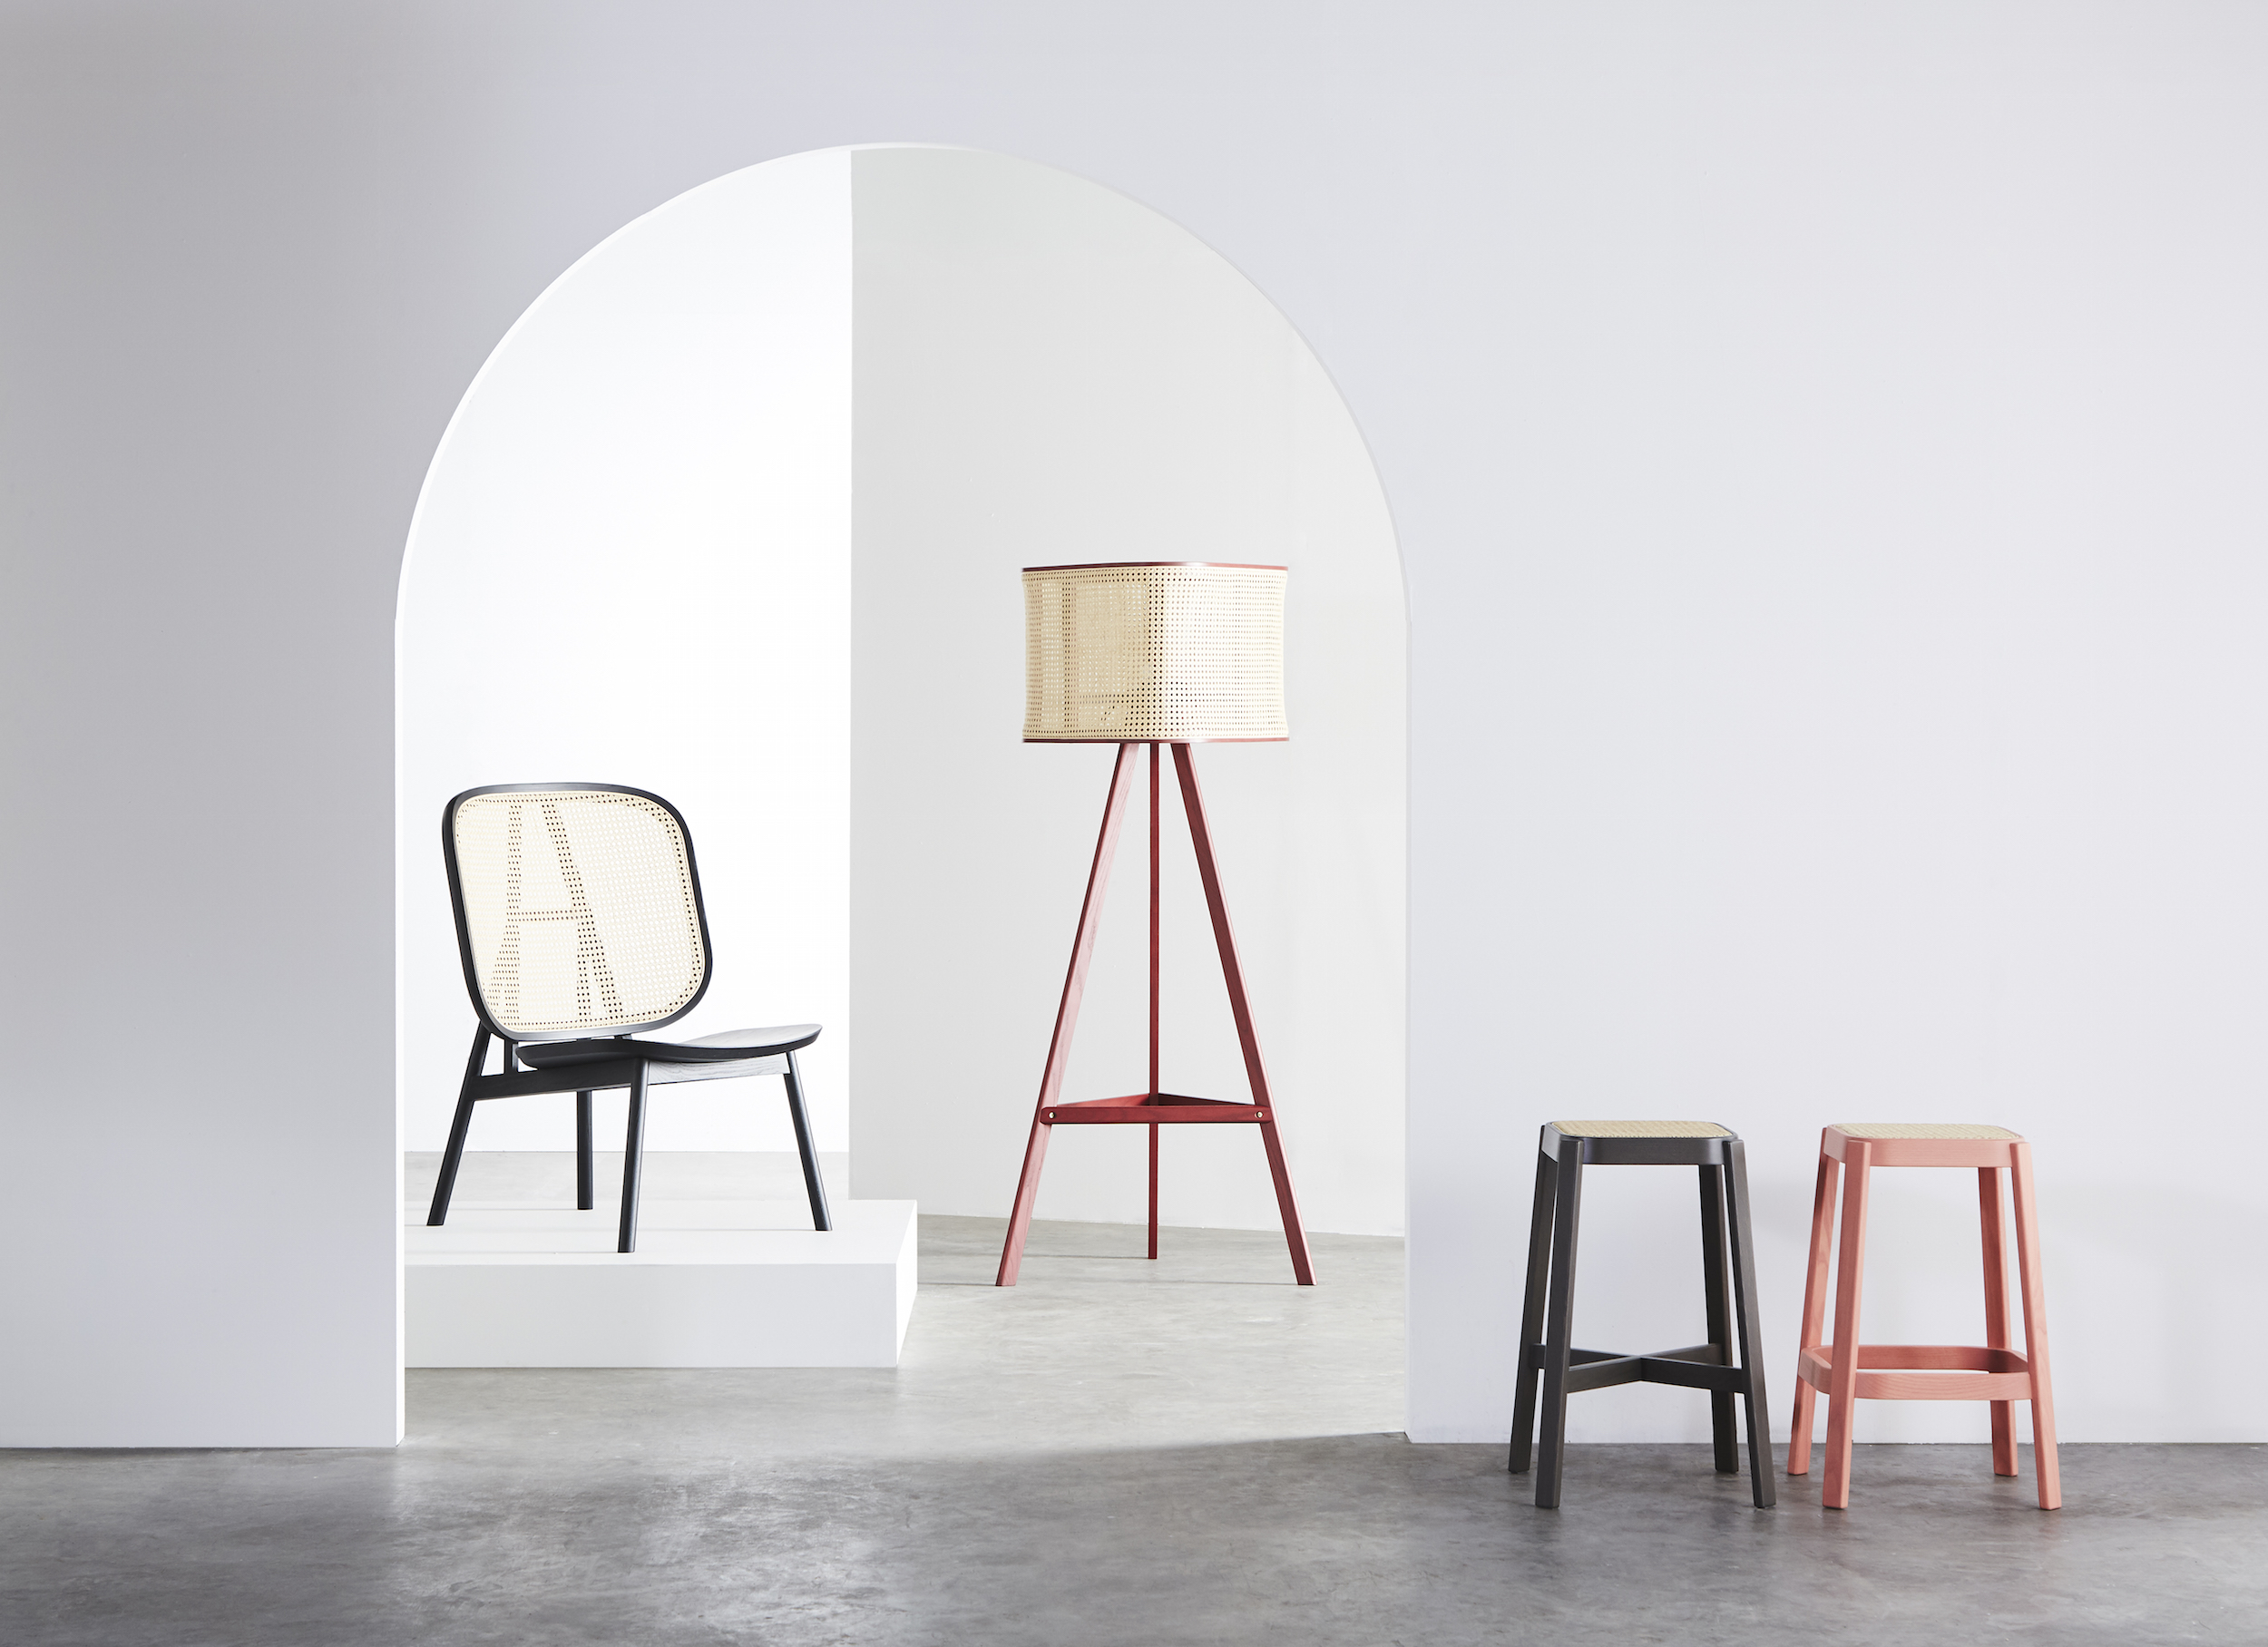   Cane Lounge Chair - 01  (Charcoal Black) /  Cane Lamp - 01  (Dark Red) /  Cane Stool  (Charcoal Black and Coral Pink) 